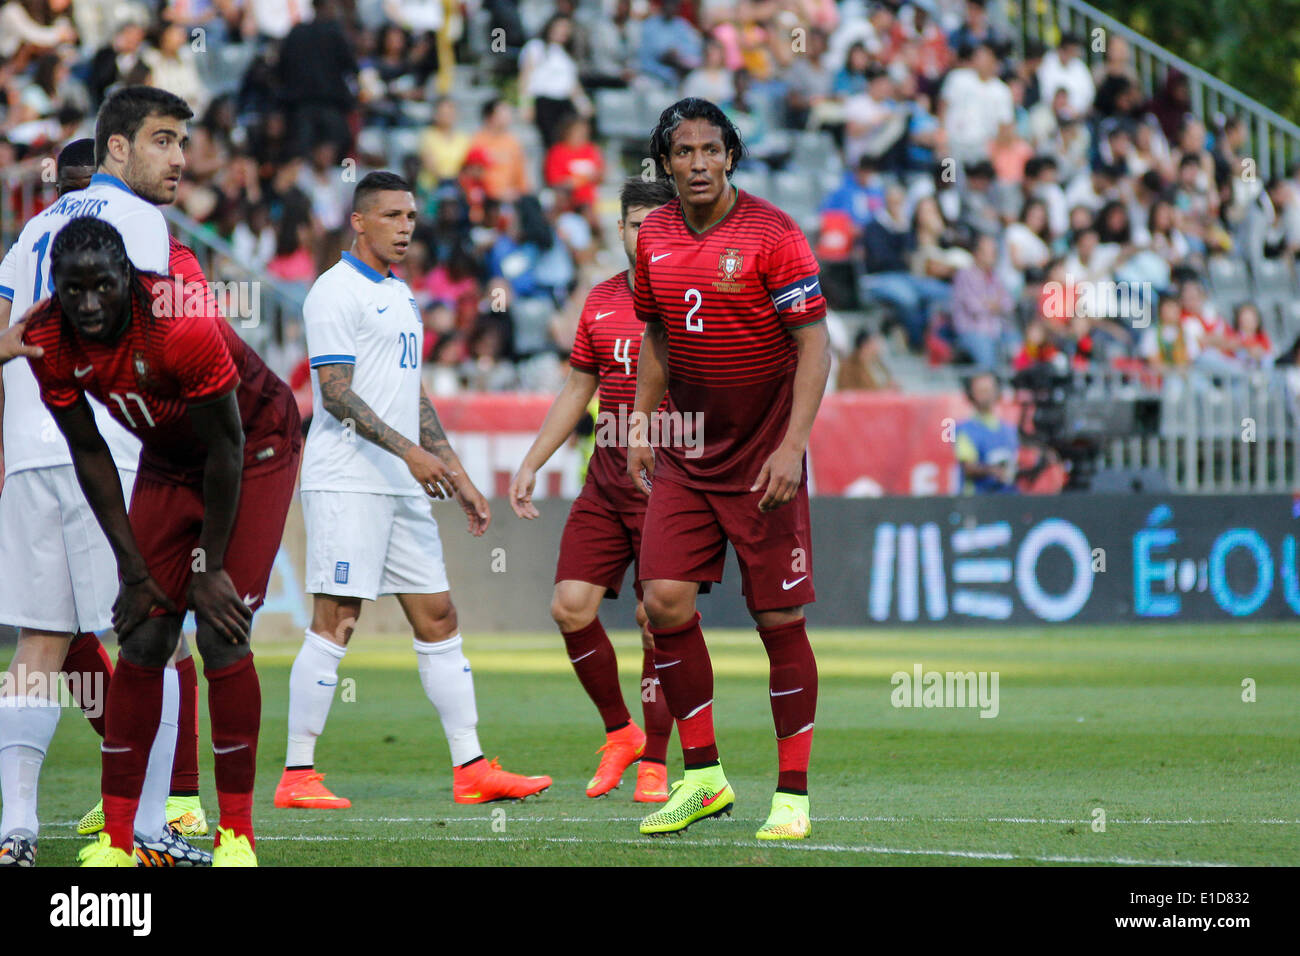 Lisbon, Porrtugal. 31st May, 2014. Portugal defender Bruno Alves (2) during preparatory friendly match for the World Cup at the National Stadium in Lisbon, Portugal, Saturday, May 31, 2014. Credit:  Leonardo Mota/Alamy Live News Stock Photo